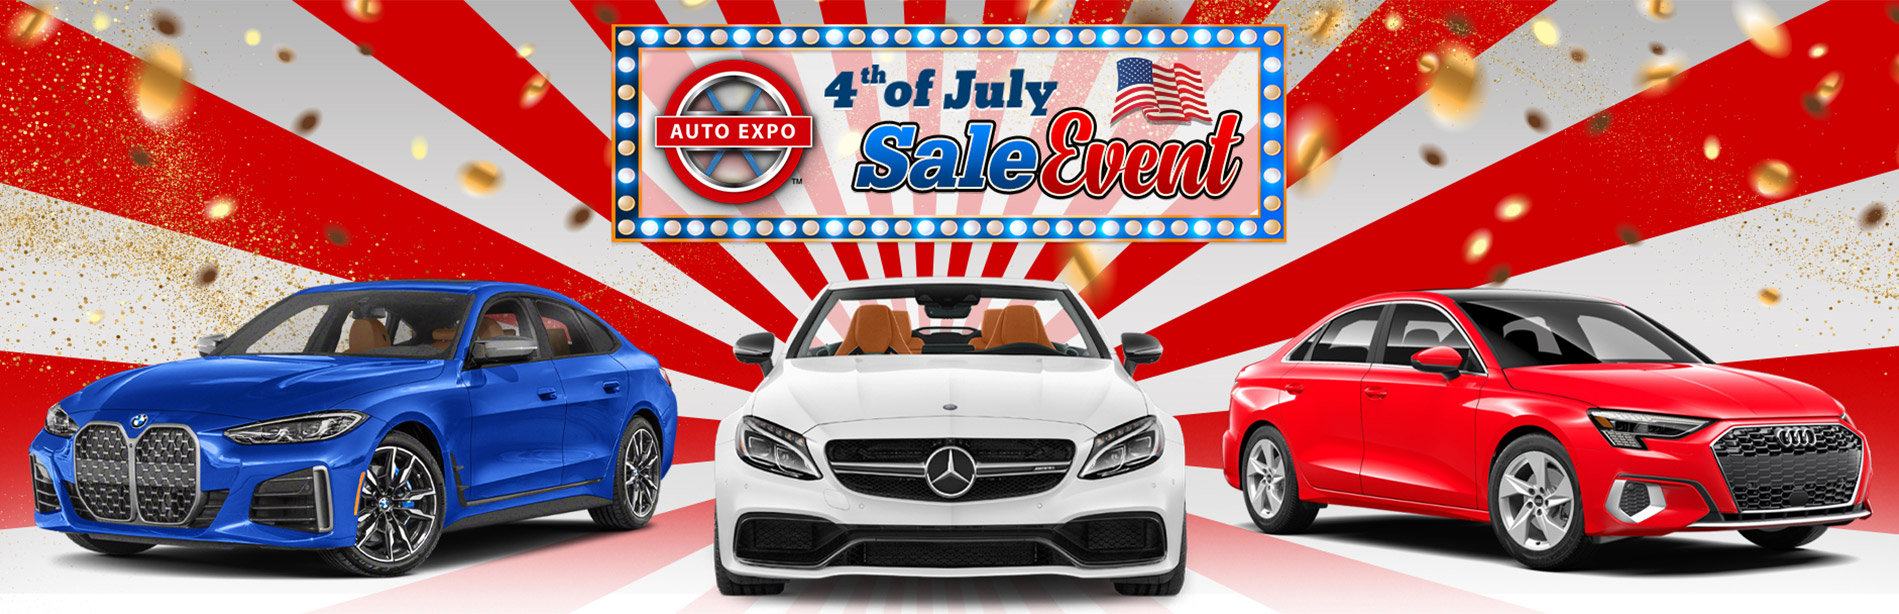 4th of july sale event